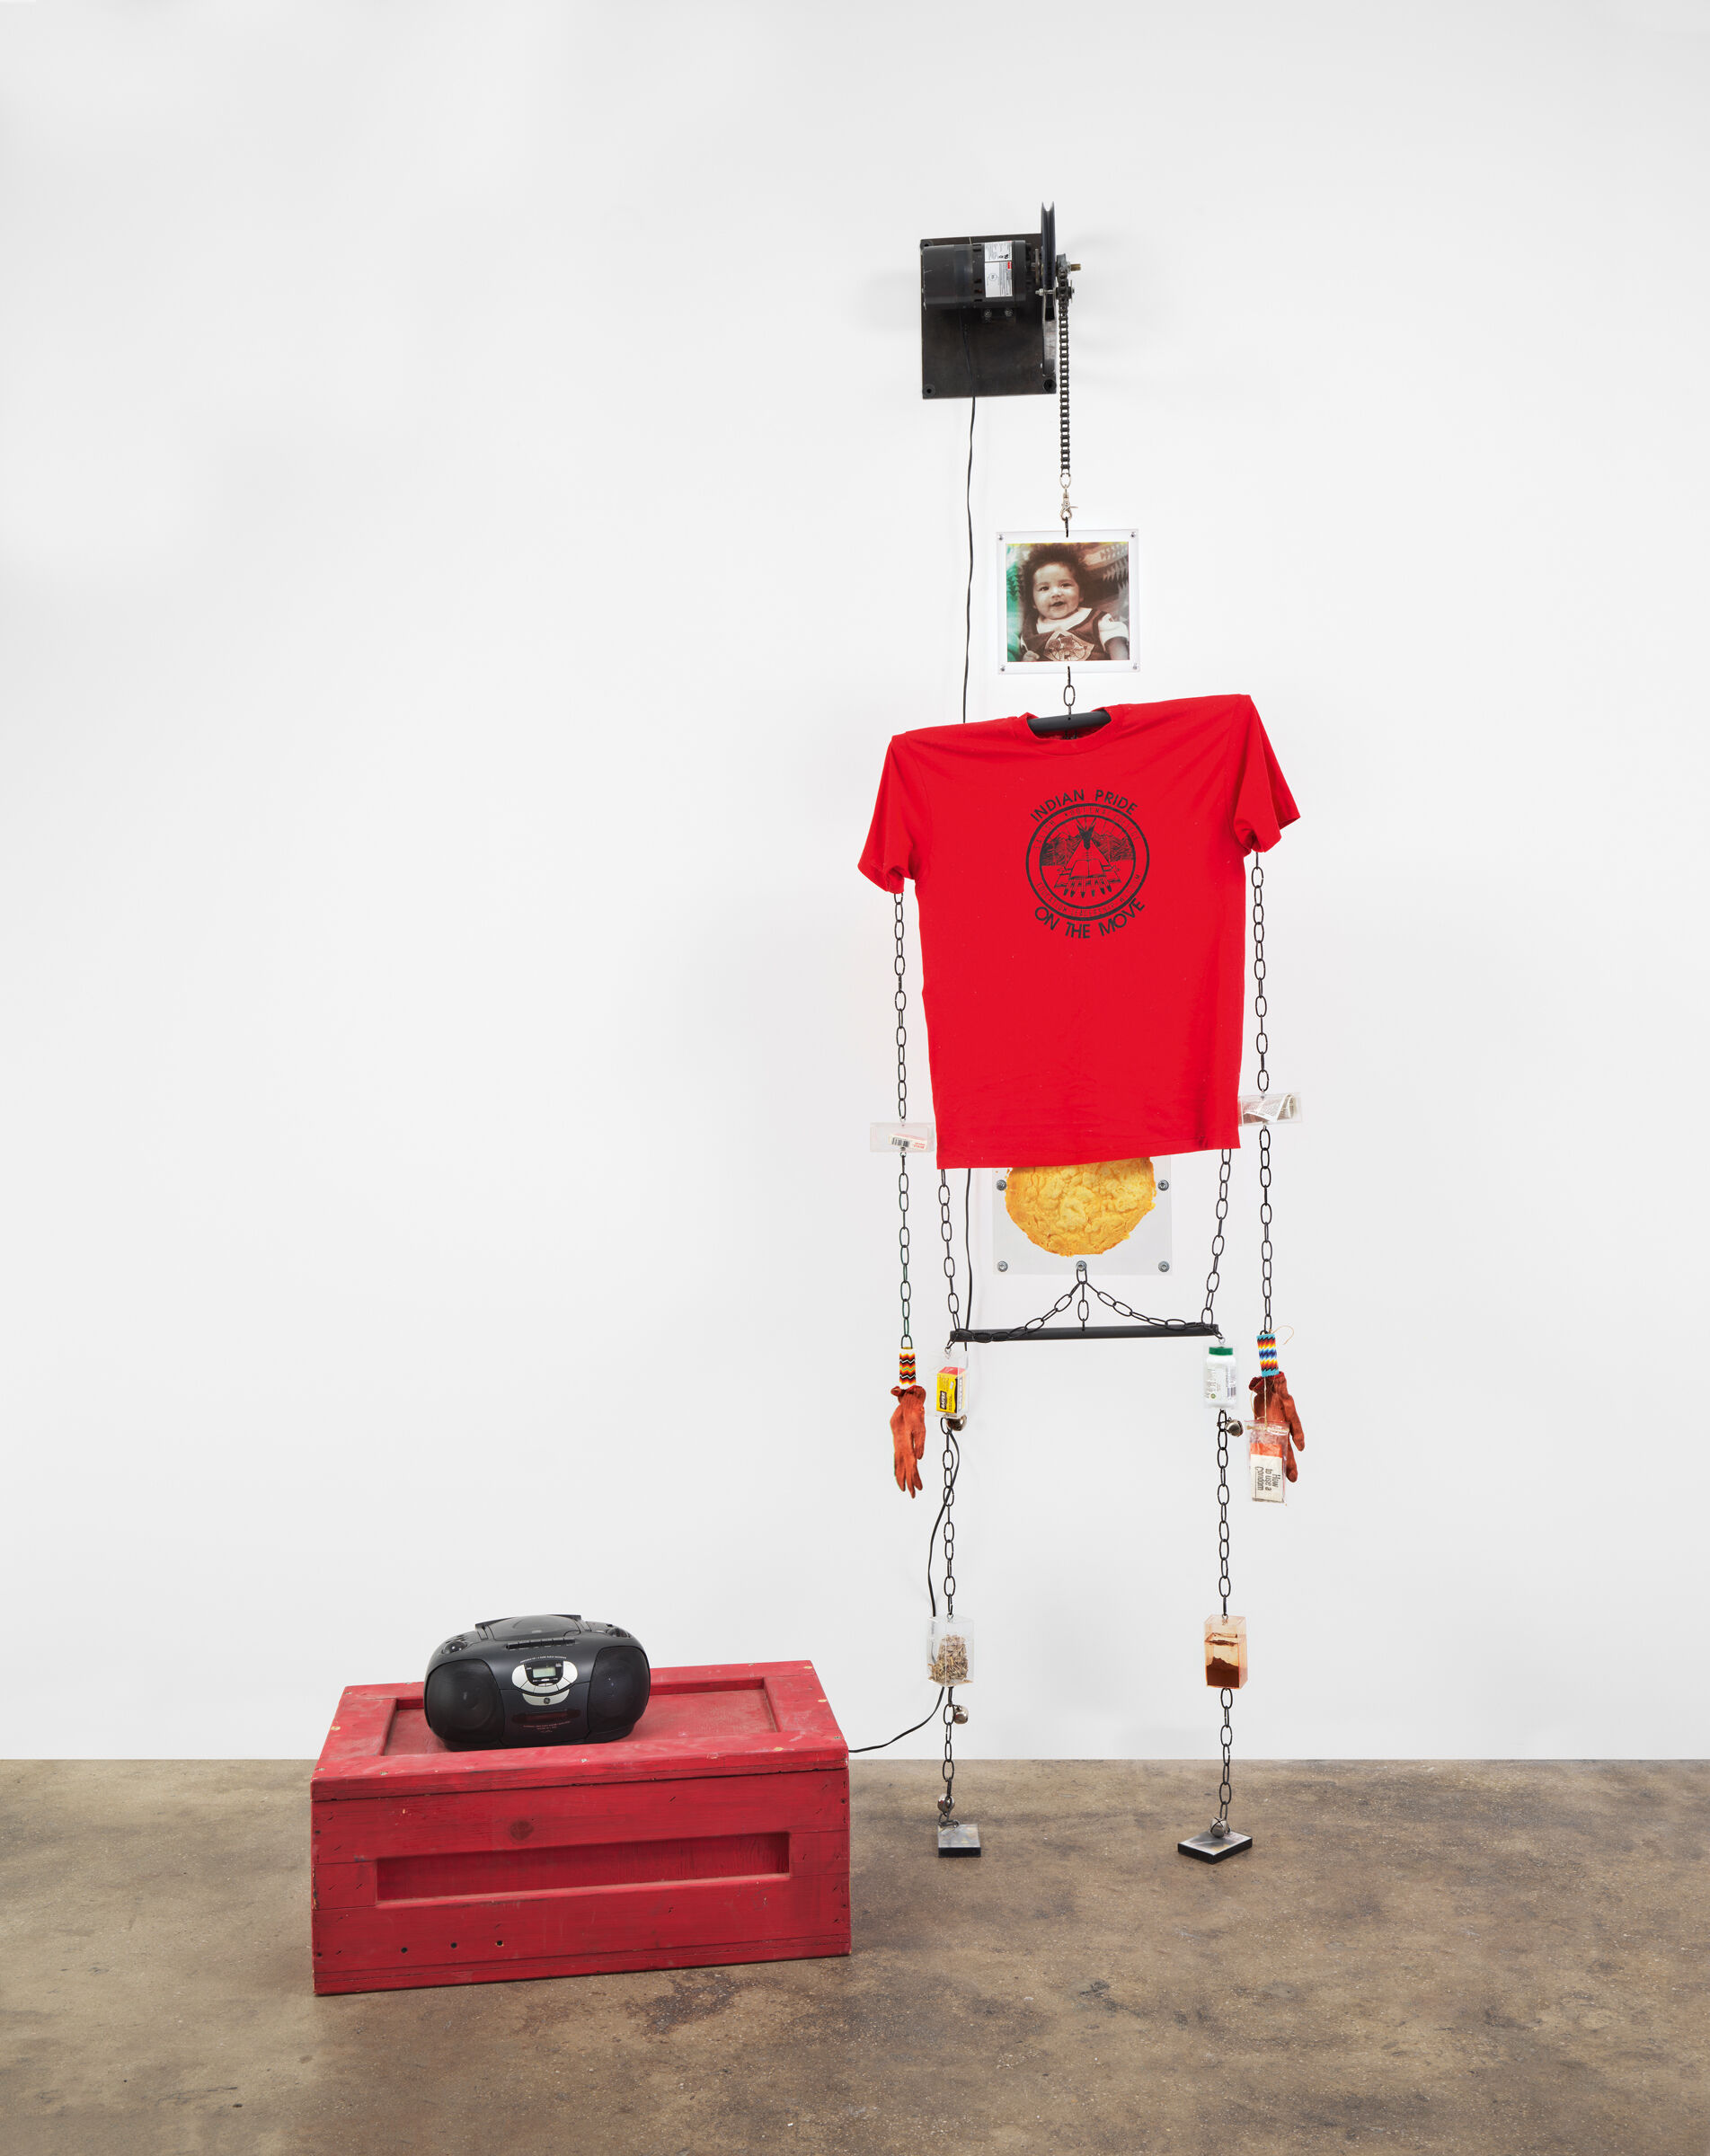 The shape of a human constructed out of chains, gloves, a t-shirt, and a photograph of a child's face next to a boombox. 